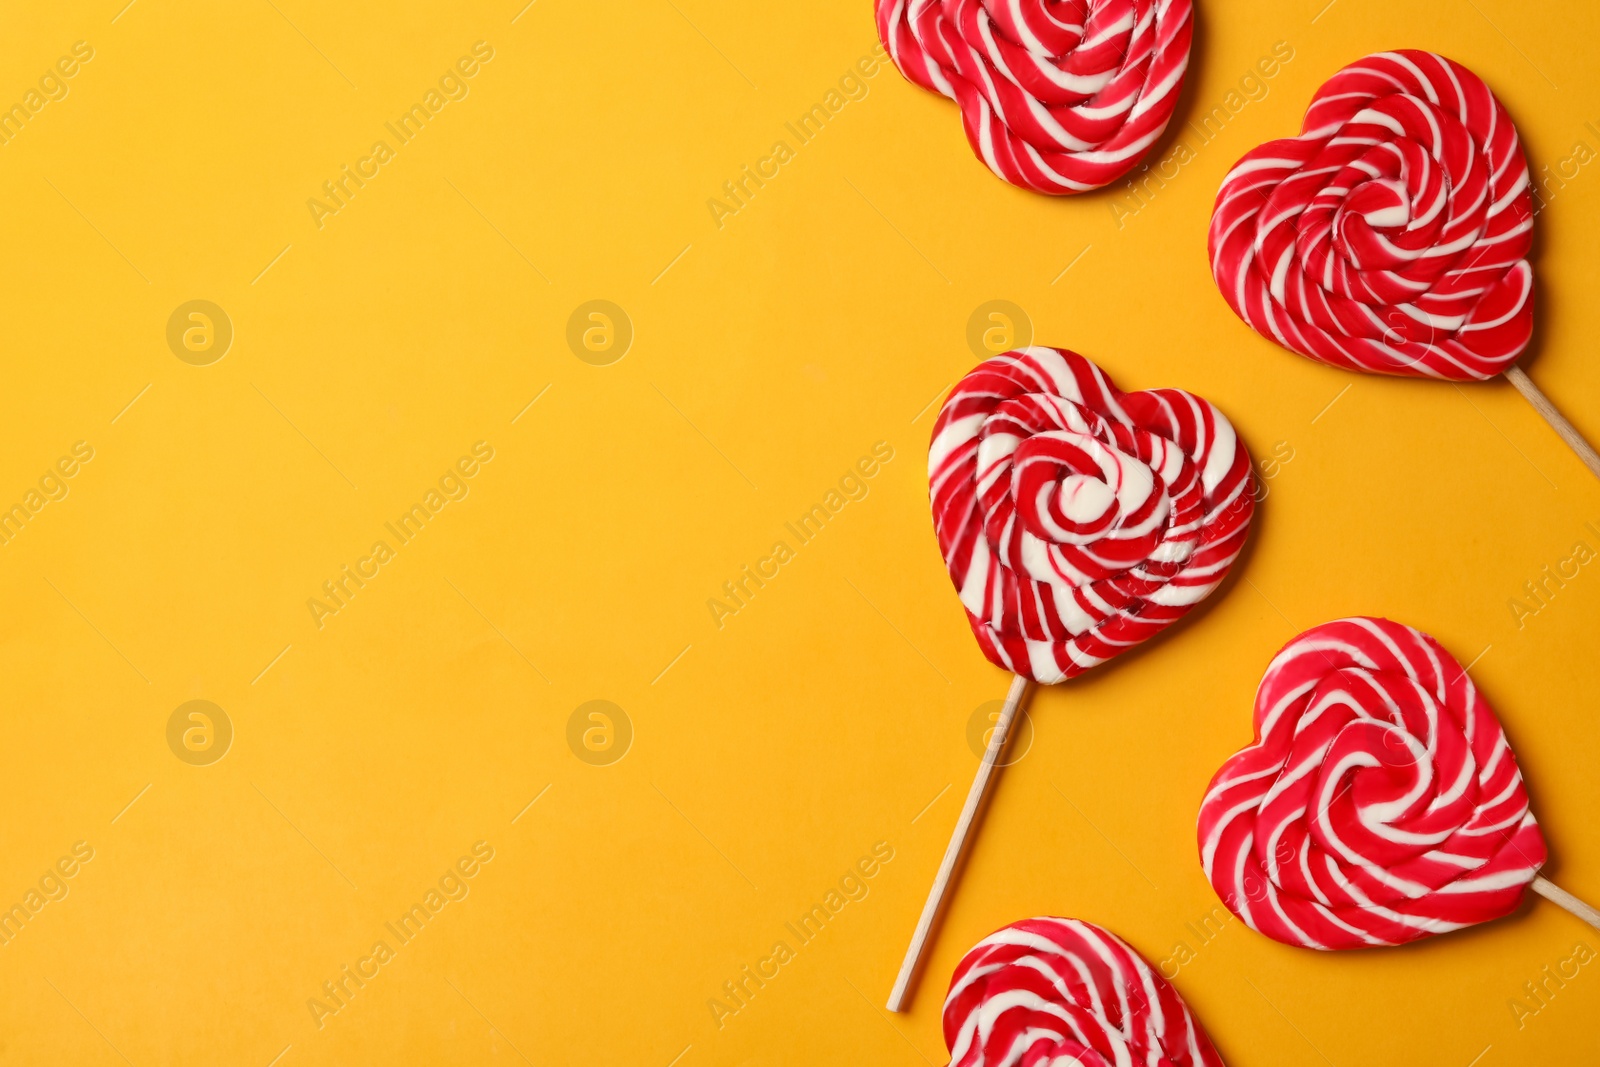 Photo of Sweet heart shaped lollipops on orange background, flat lay with space for text. Valentine's day celebration